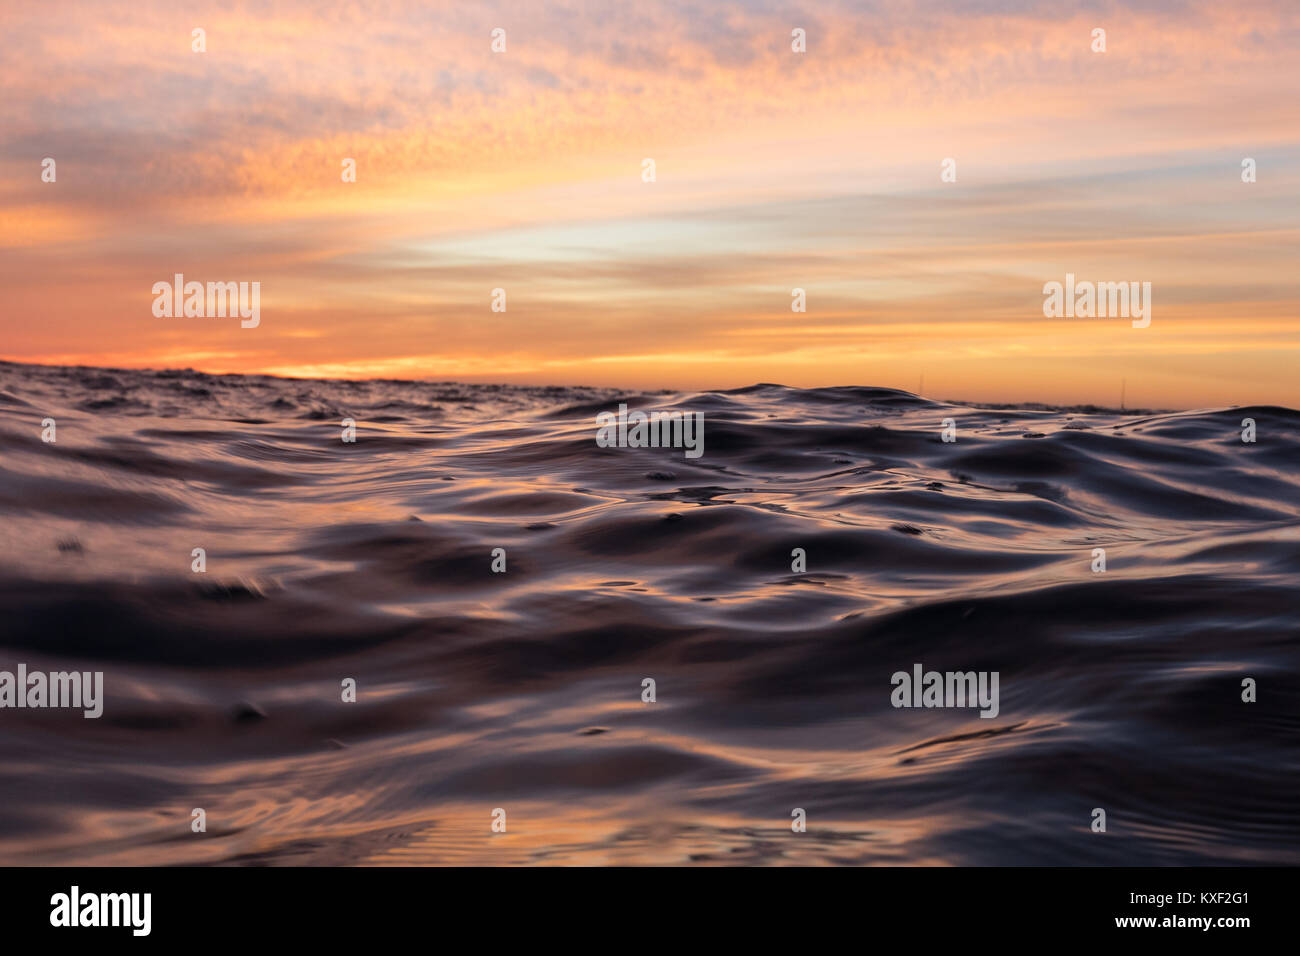 Ripples extend across the surface of the ocean during a vibrant sunset afterglow in Los Angeles, California. Stock Photo